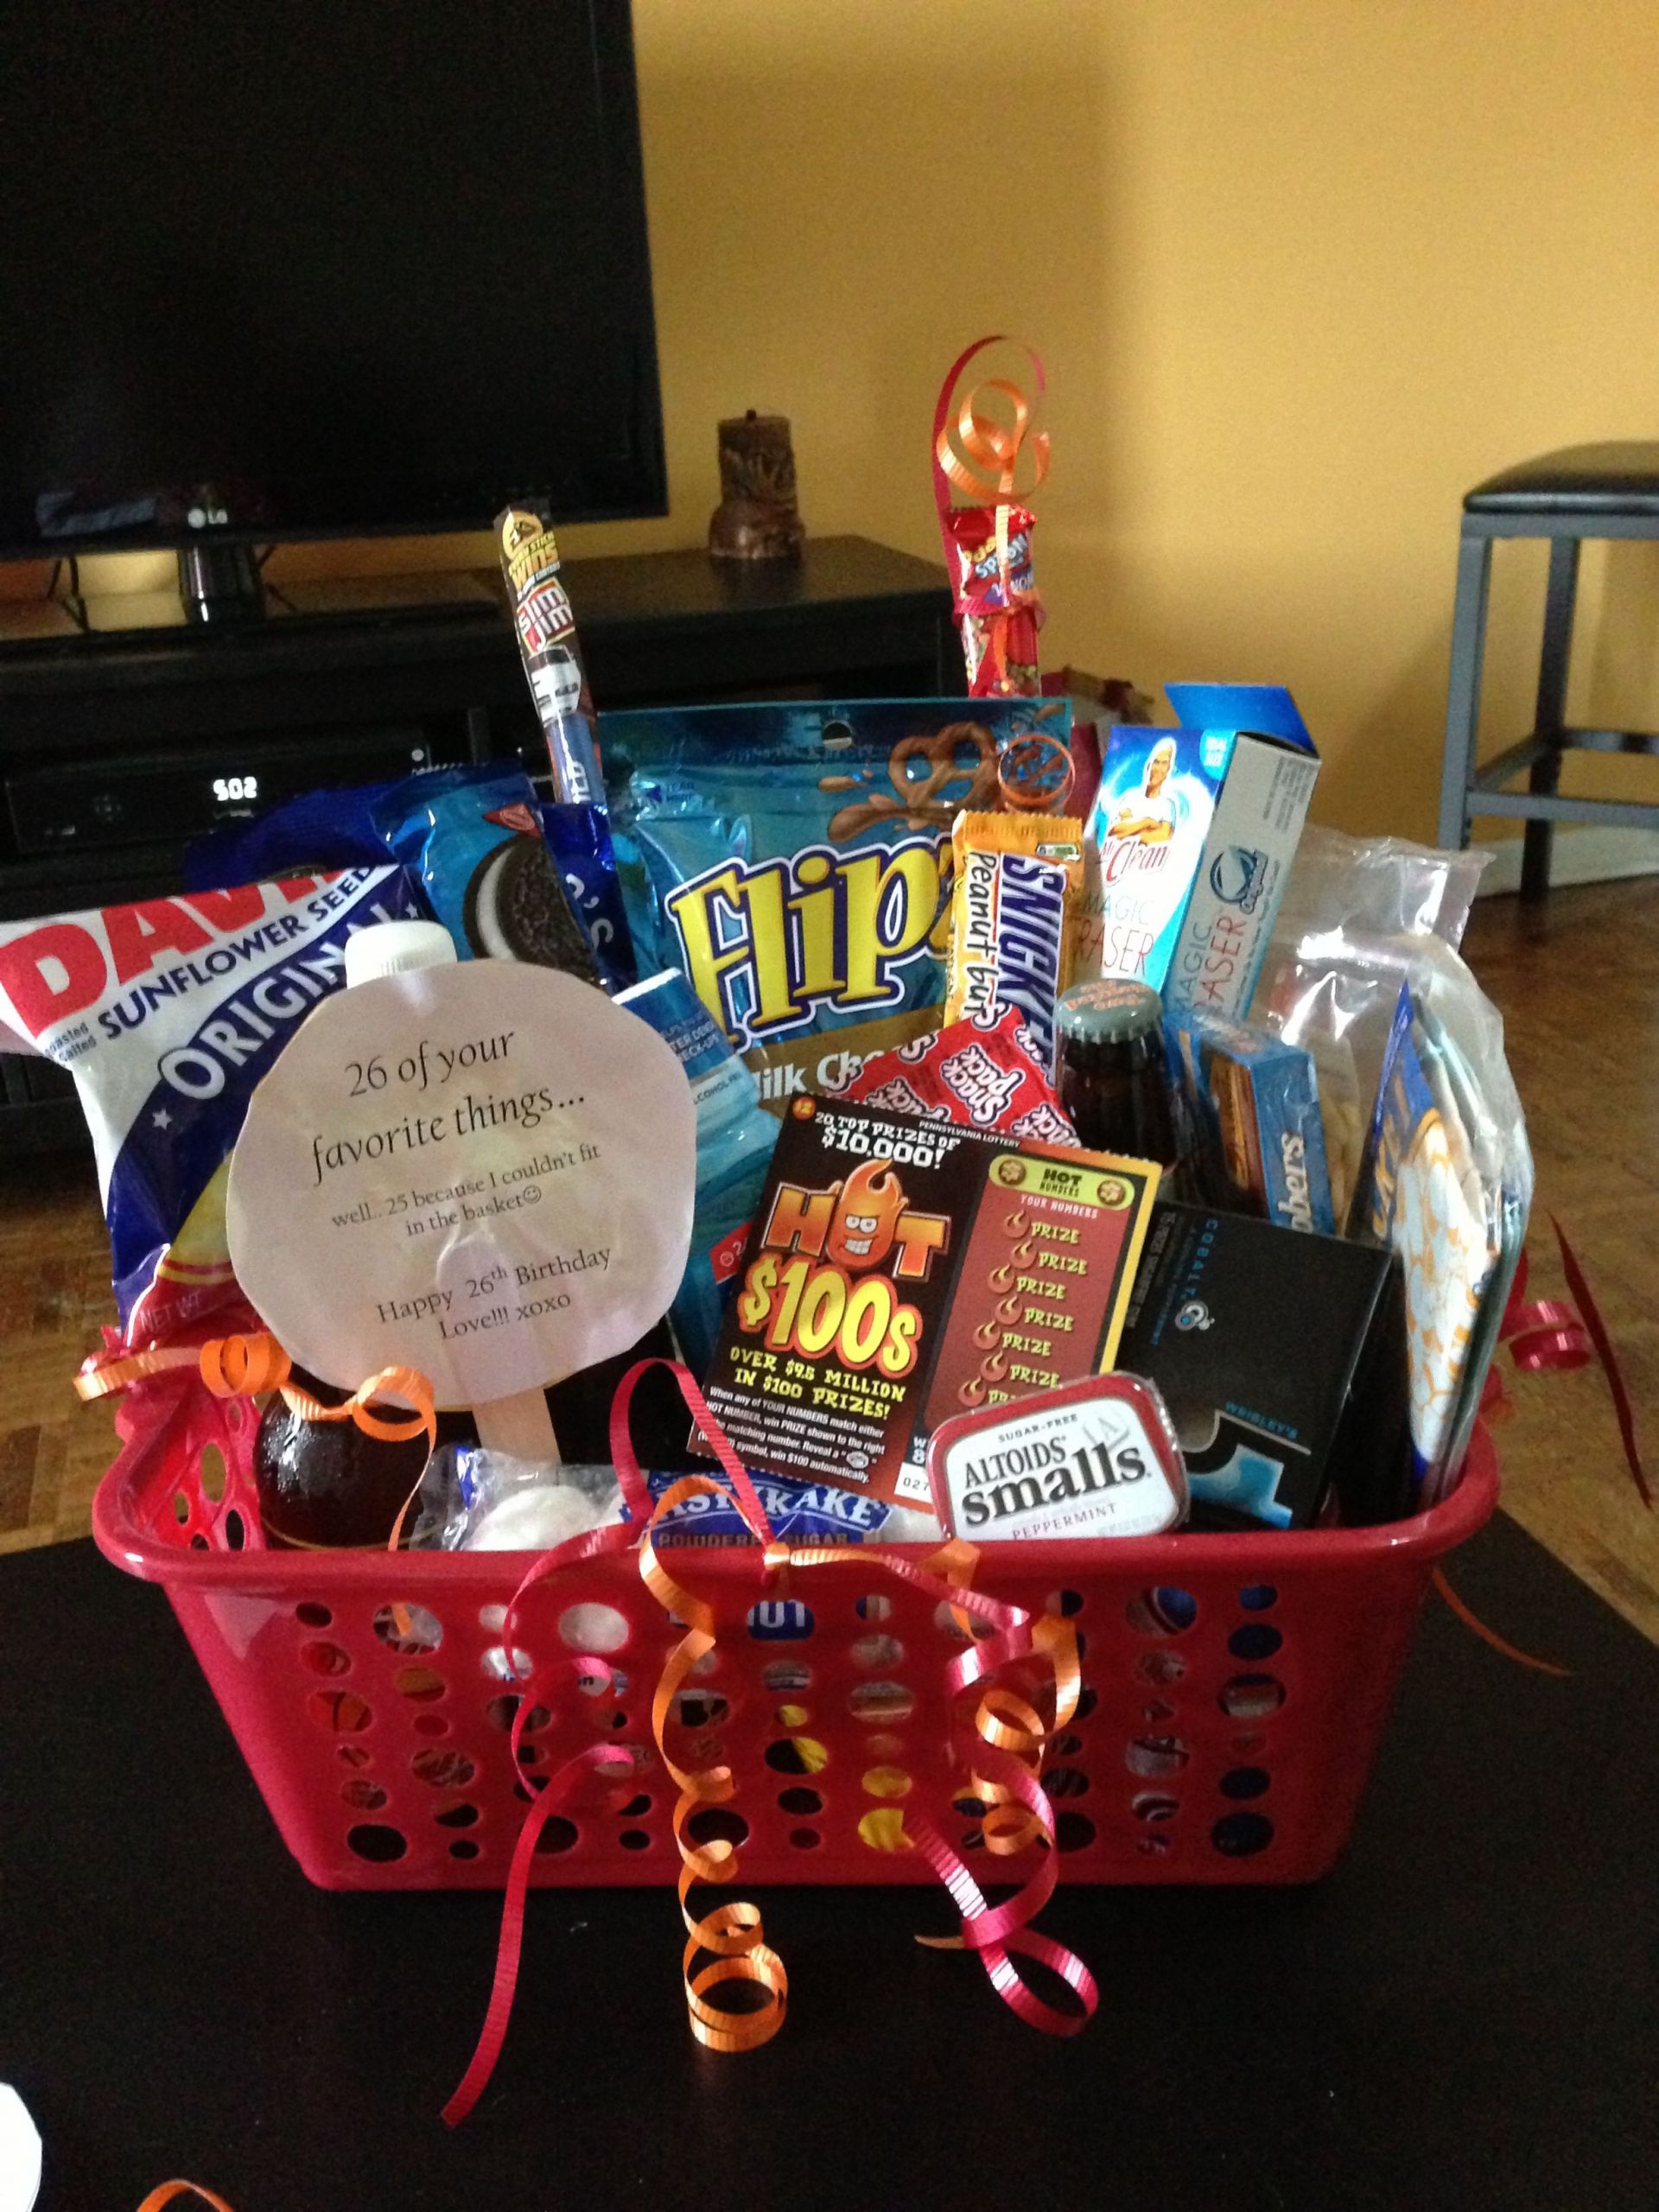 Birthday Gift Baskets For Him
 Boyfriend birthday basket 26 of his favorite things for